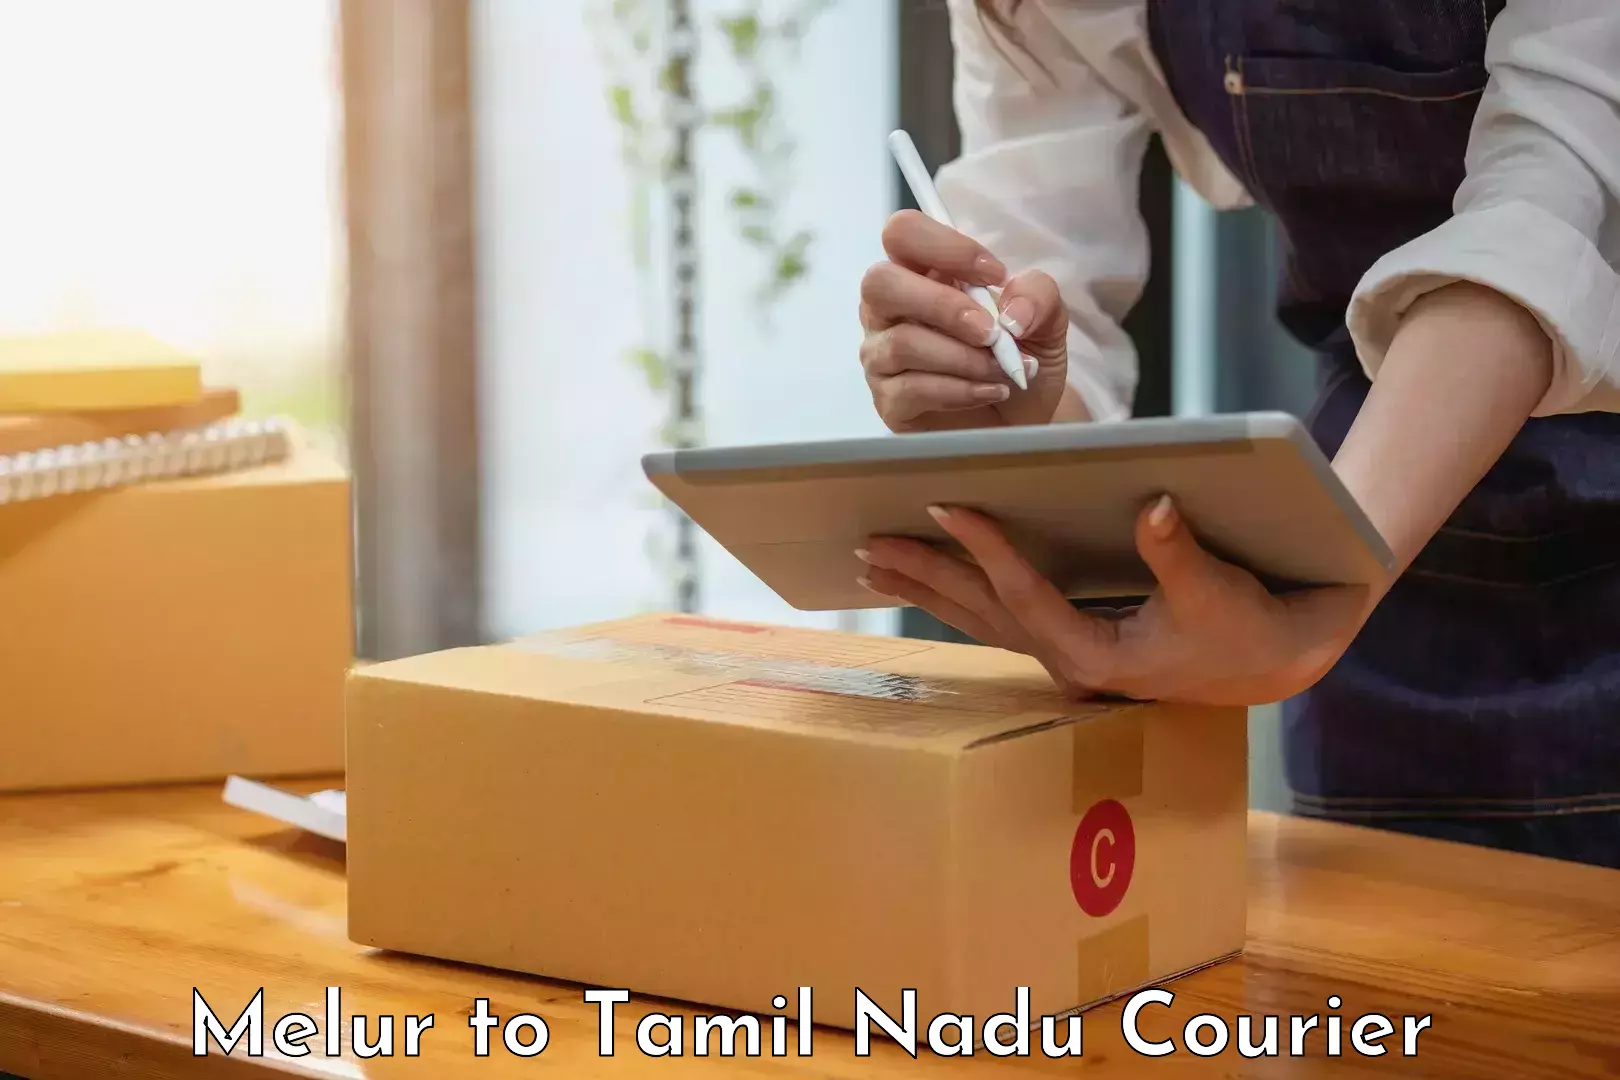 Courier service booking Melur to Tamil Nadu